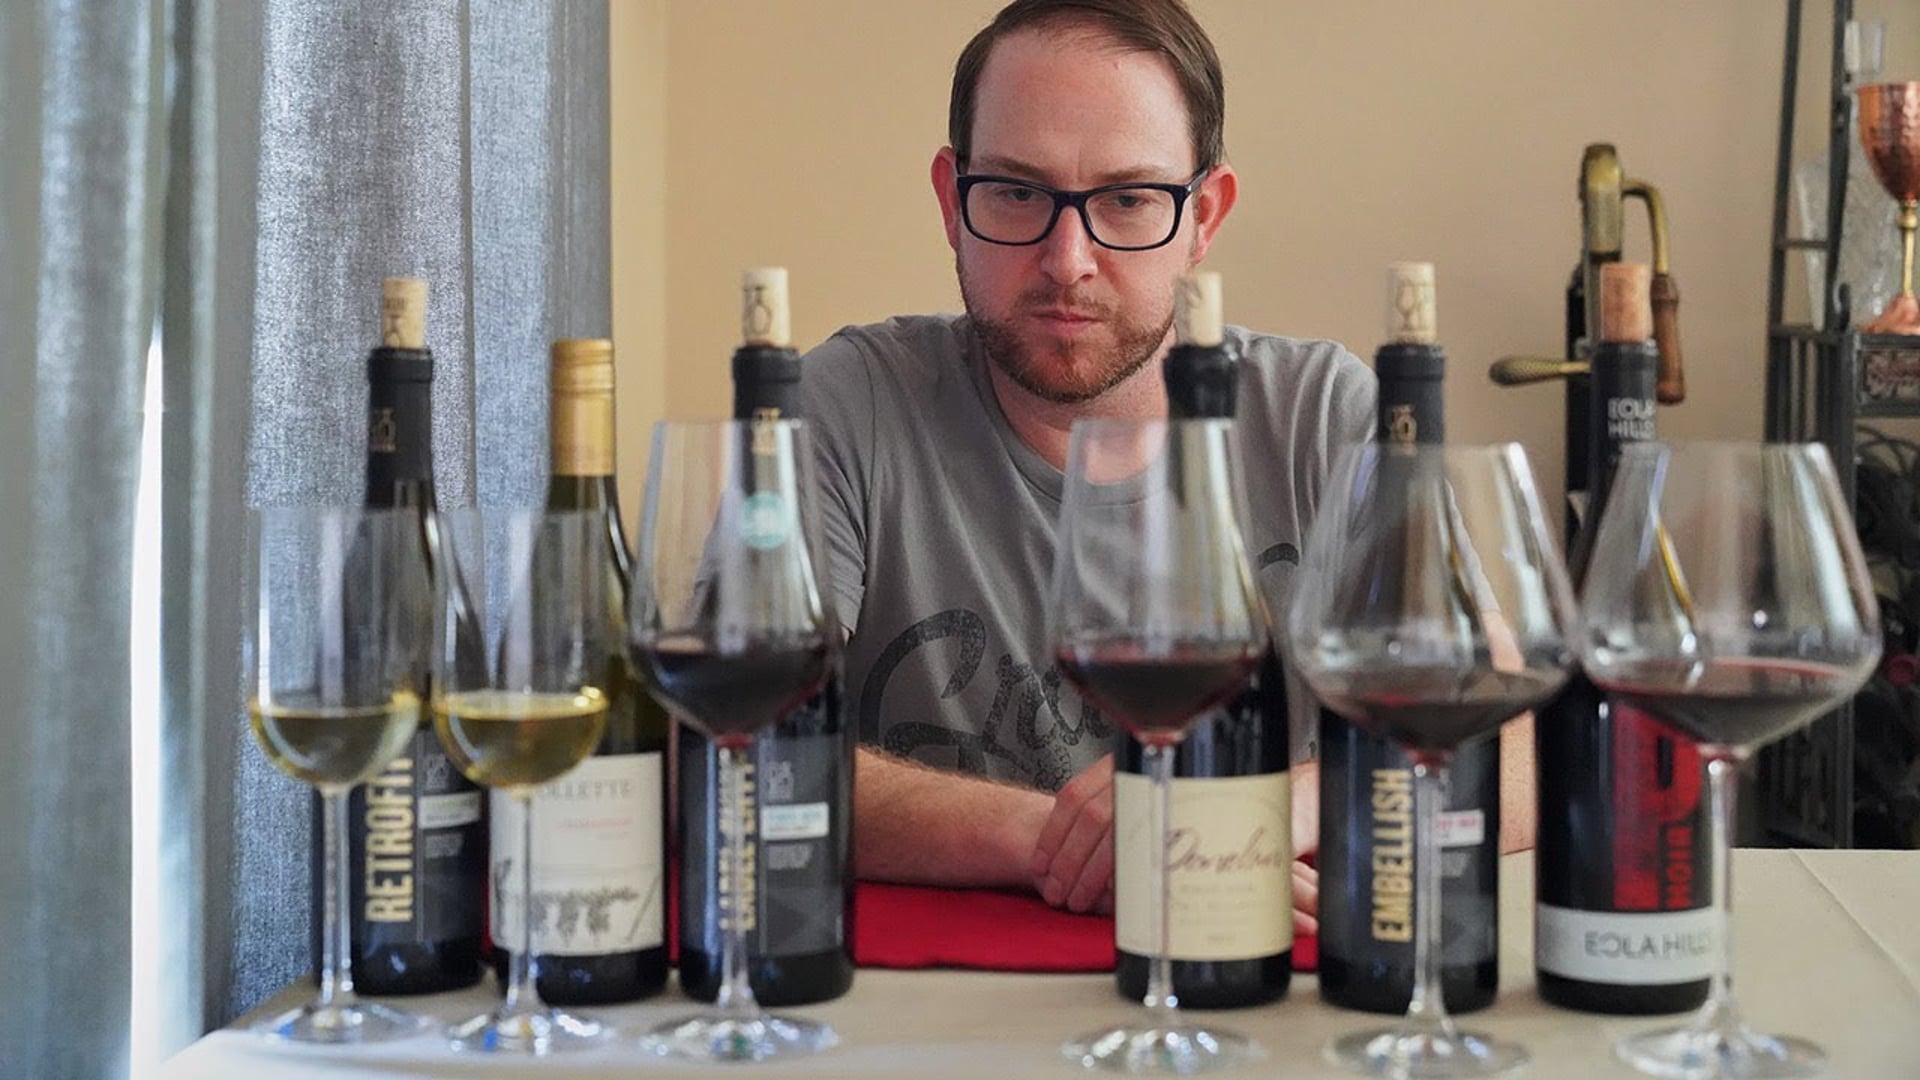 Watch Blind taste test comparing Replica's copycat wines to the real thing on our Free Roku Channel